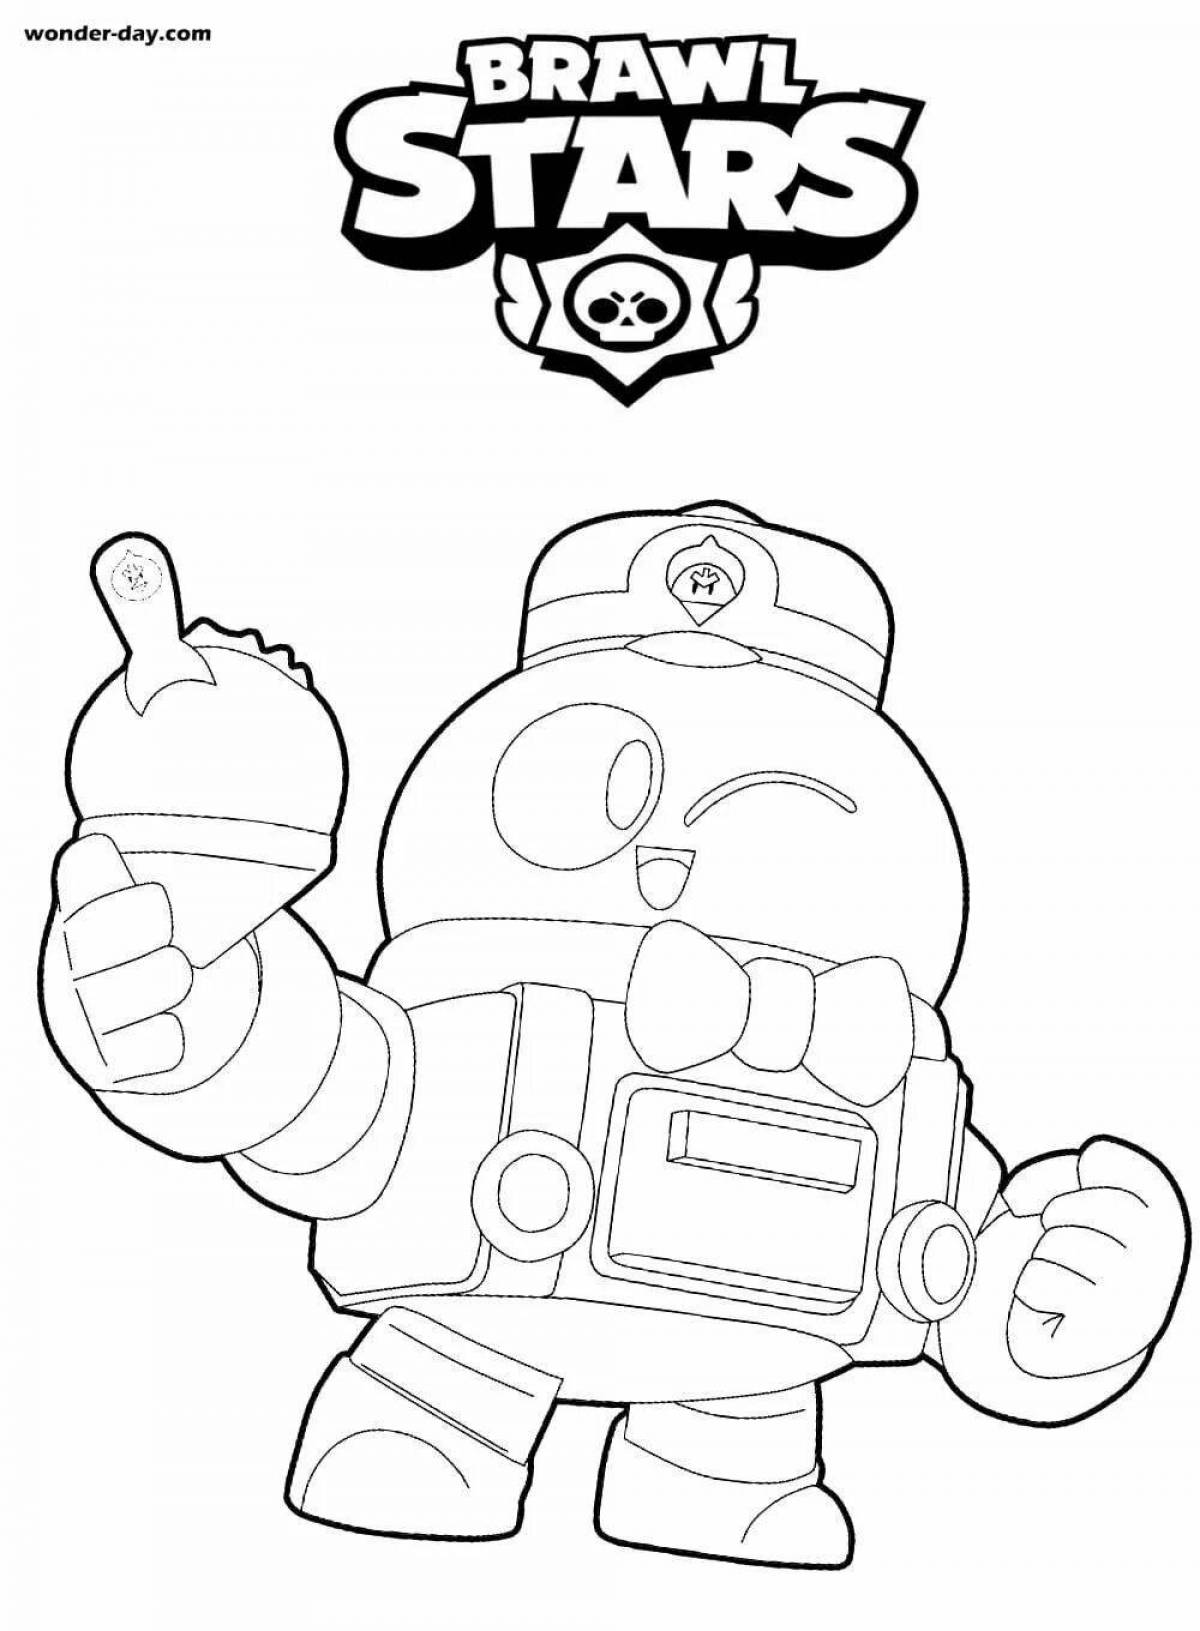 King lu's amazing coloring page